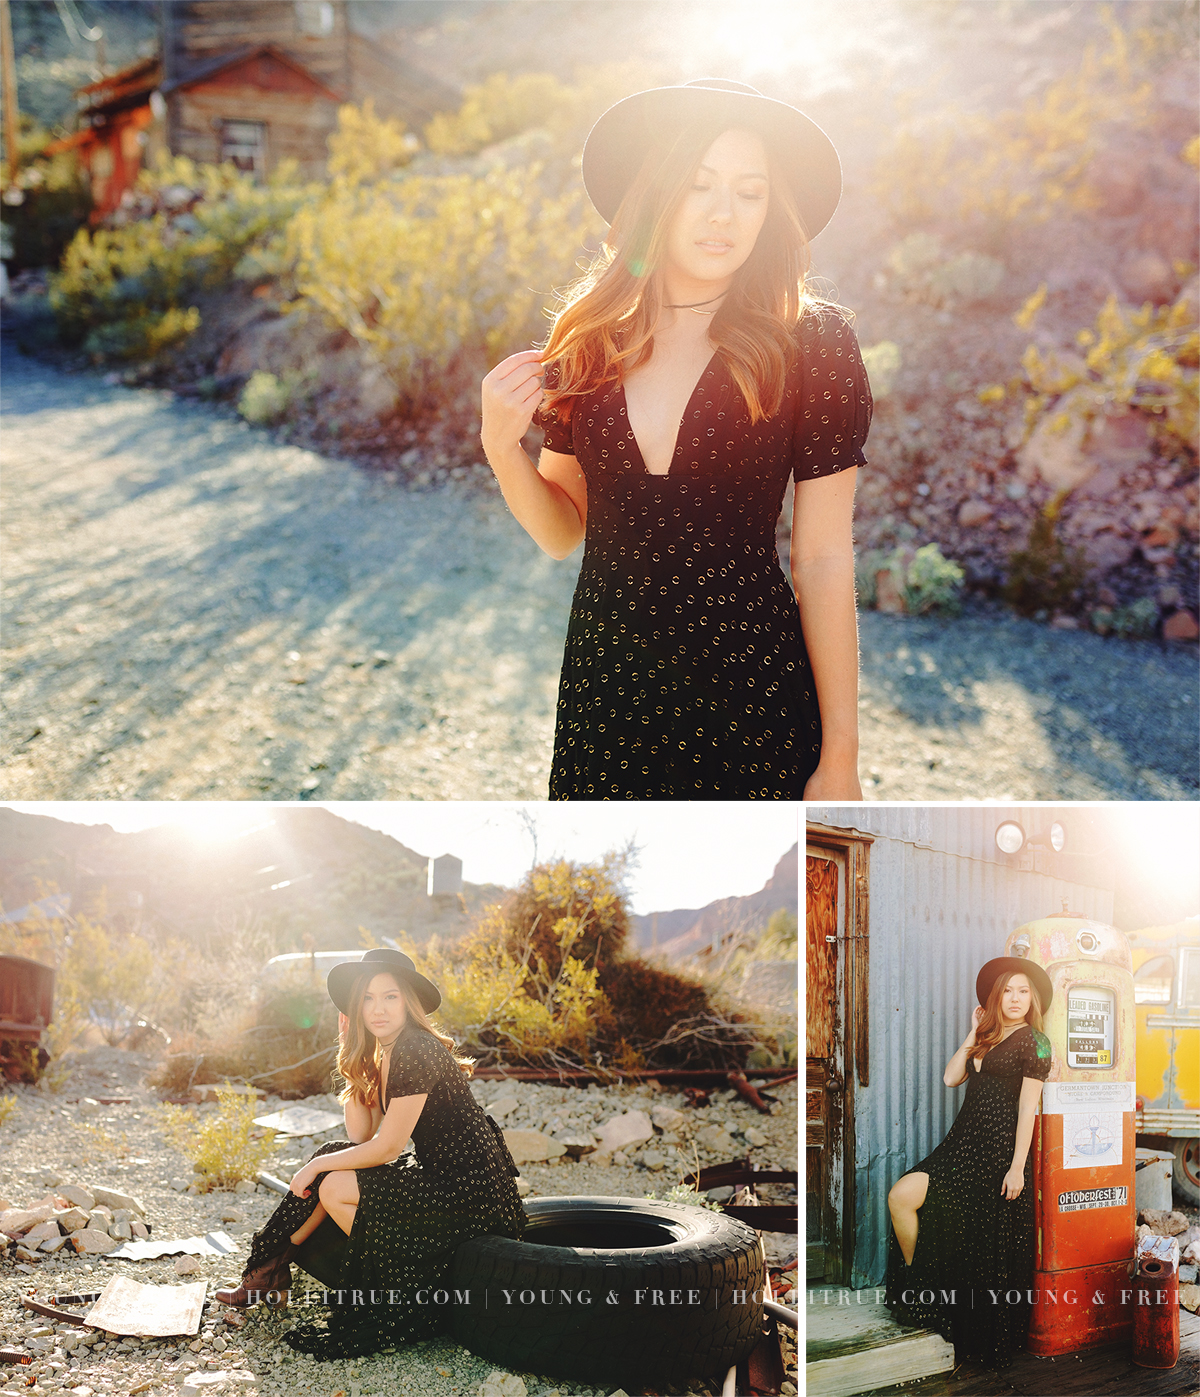 Nelson Ghost Town Senior Portrait Model Session | Deconstructed Shootout in Las Vegas, Nevada | Holli True Photography | Senior Photography in a Rustic location